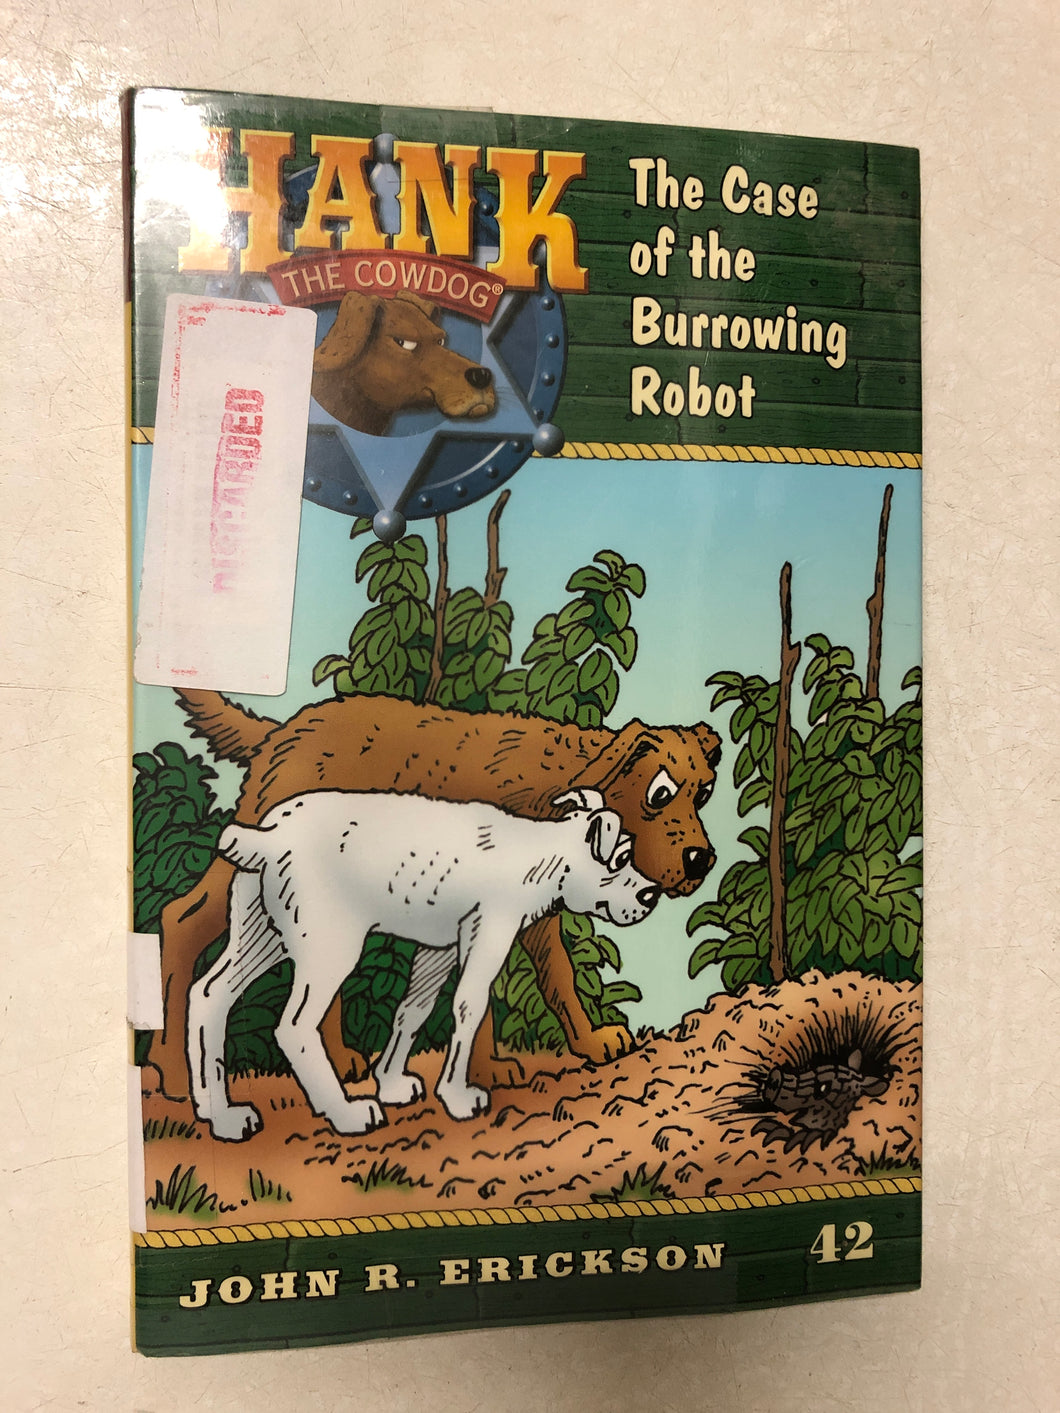 Hank the Cowdog The Case of the Burrowing Robot - Slick Cat Books 